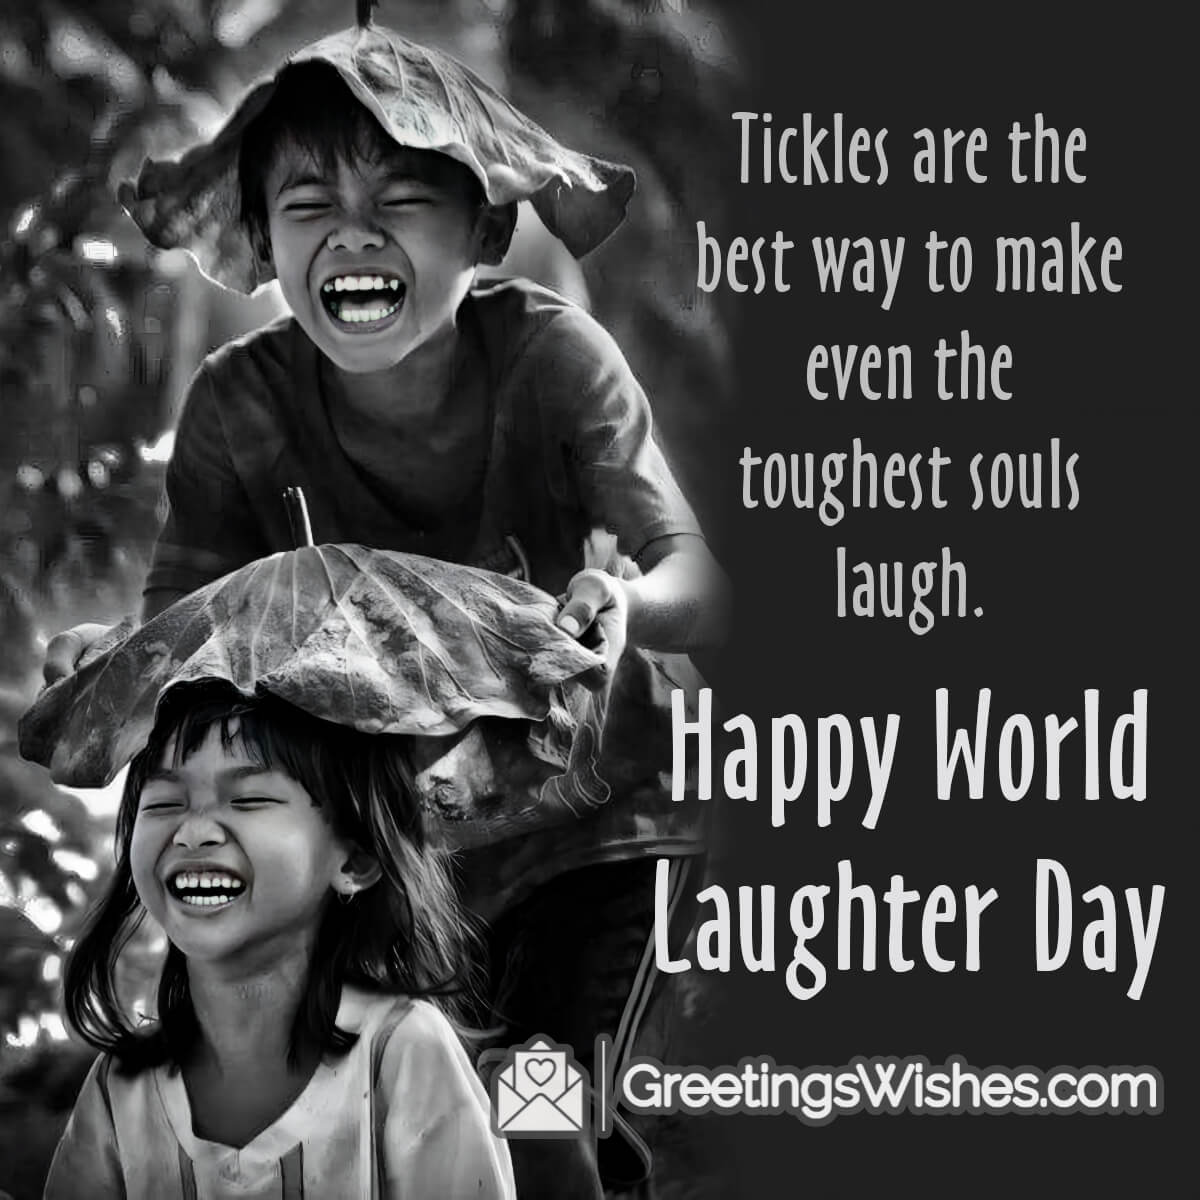 Happy World Laughter Day Quote